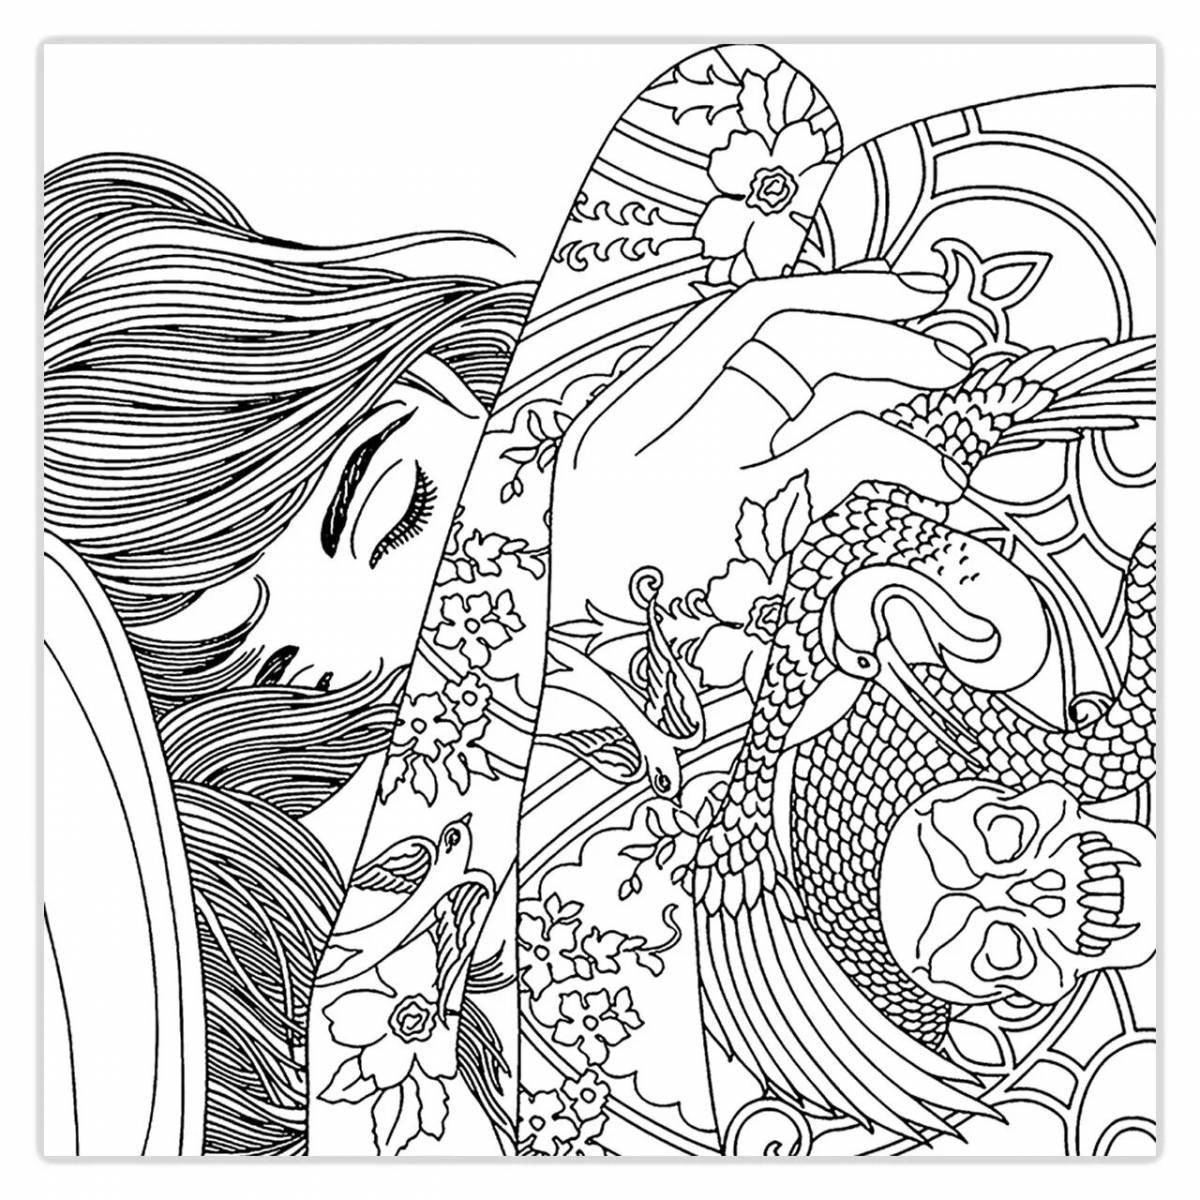 Amazing coloring book beautiful for all adults